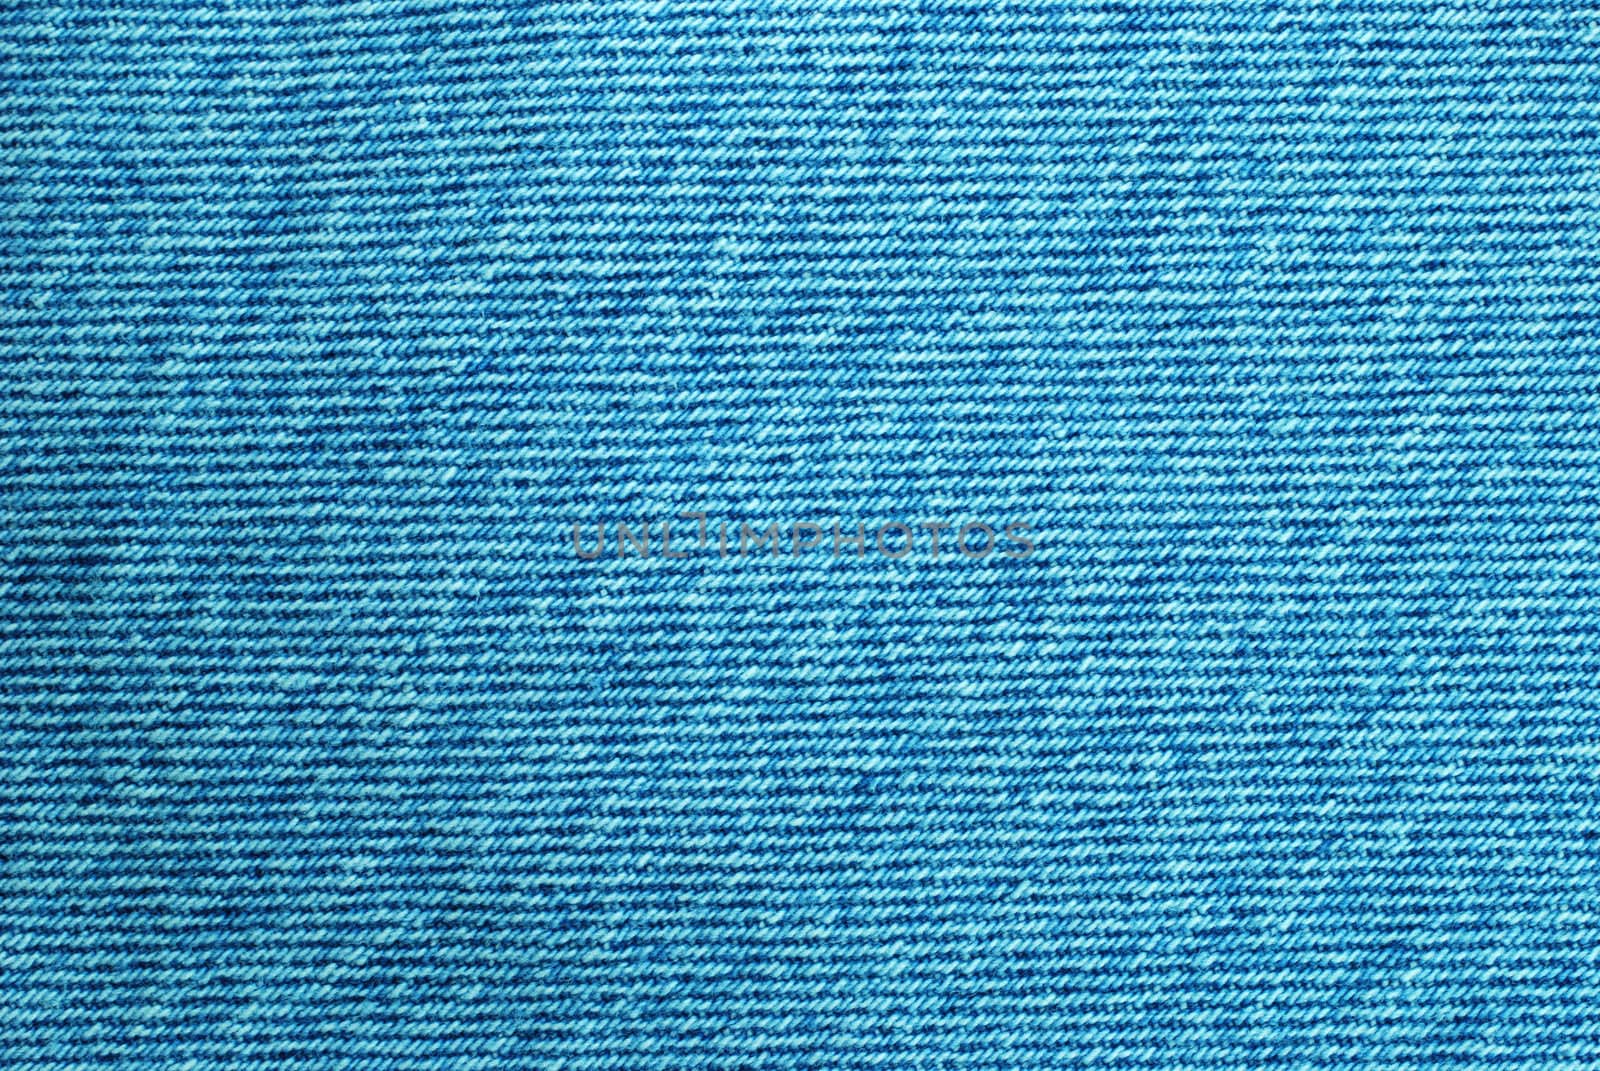 Macro of denim fabric for background use.  